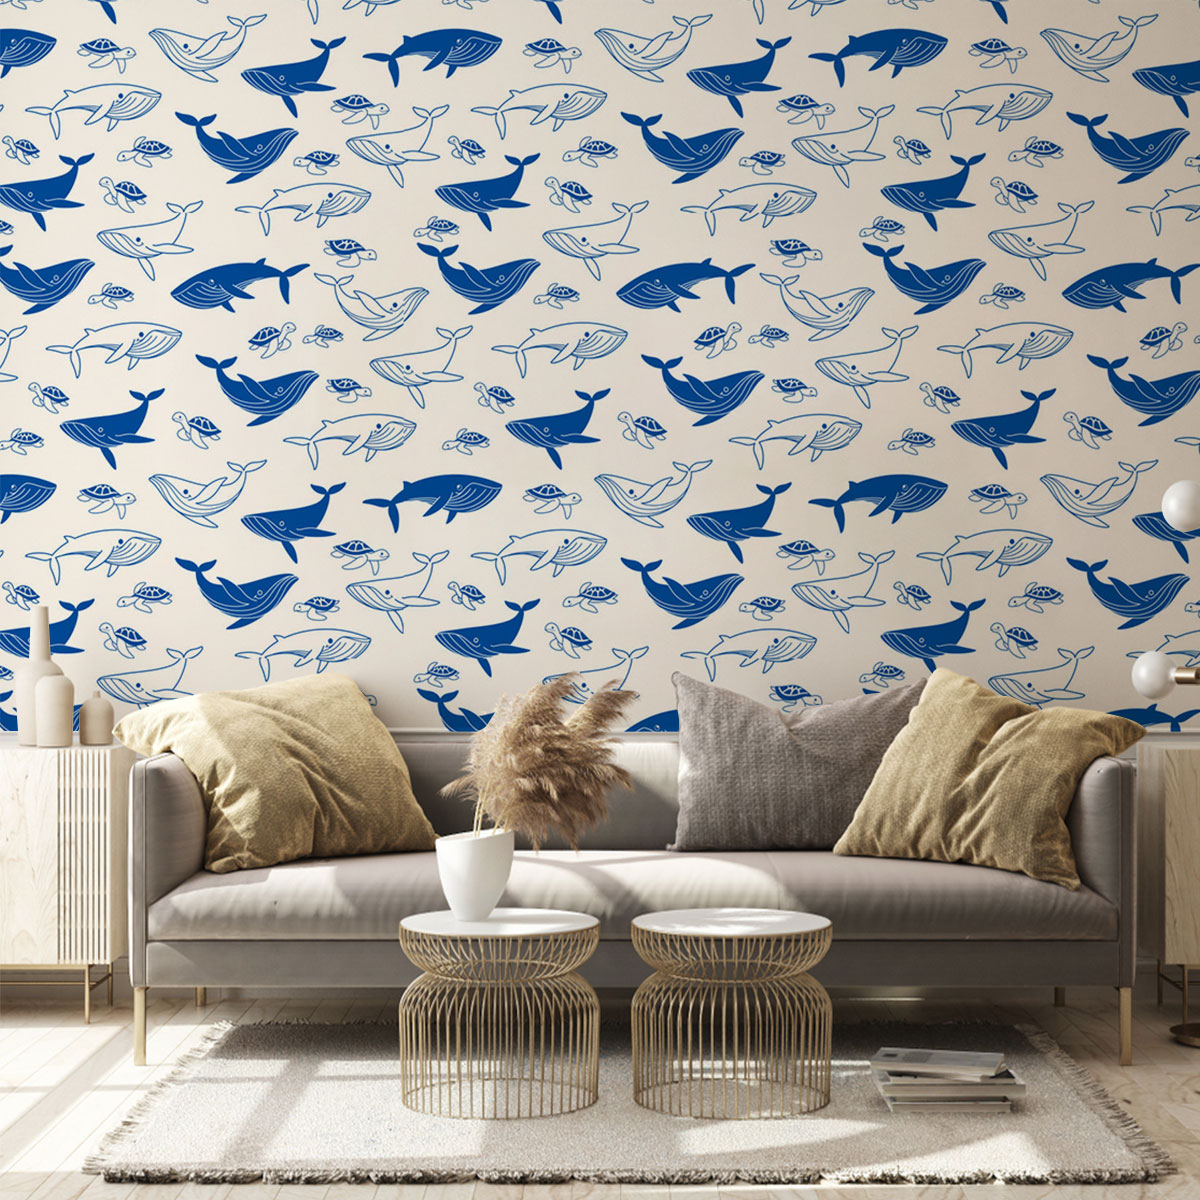 Blue Whale And White Wall Mural